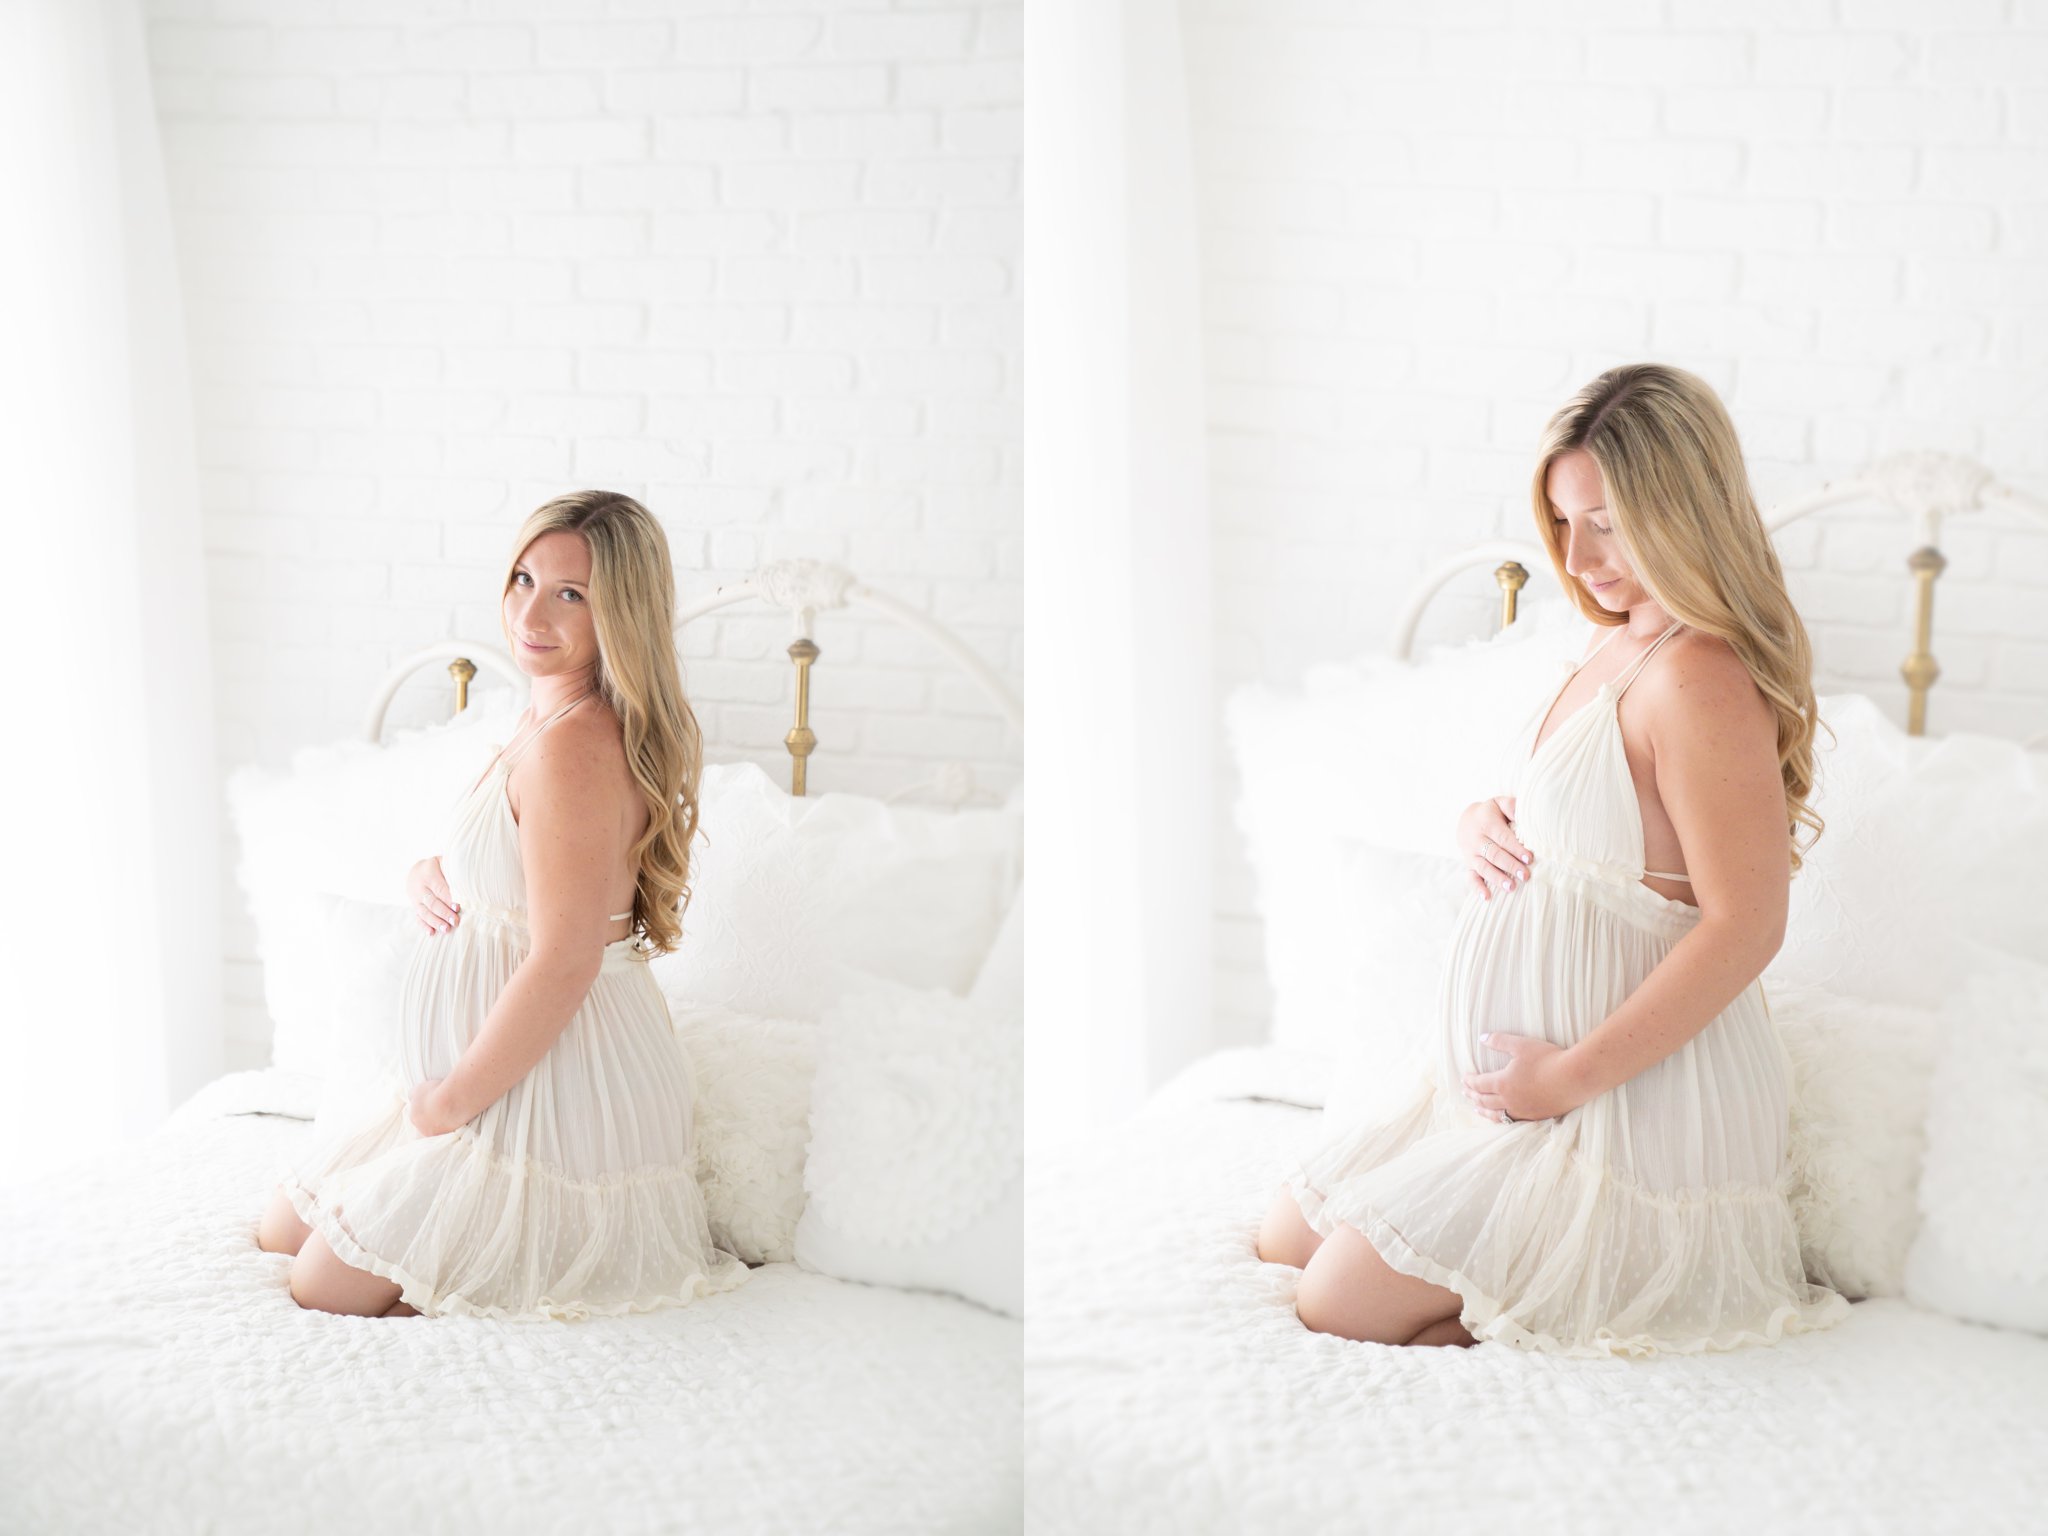 Mother to be wearing lace dress showing her baby bump in Jupiter Florida photography studio